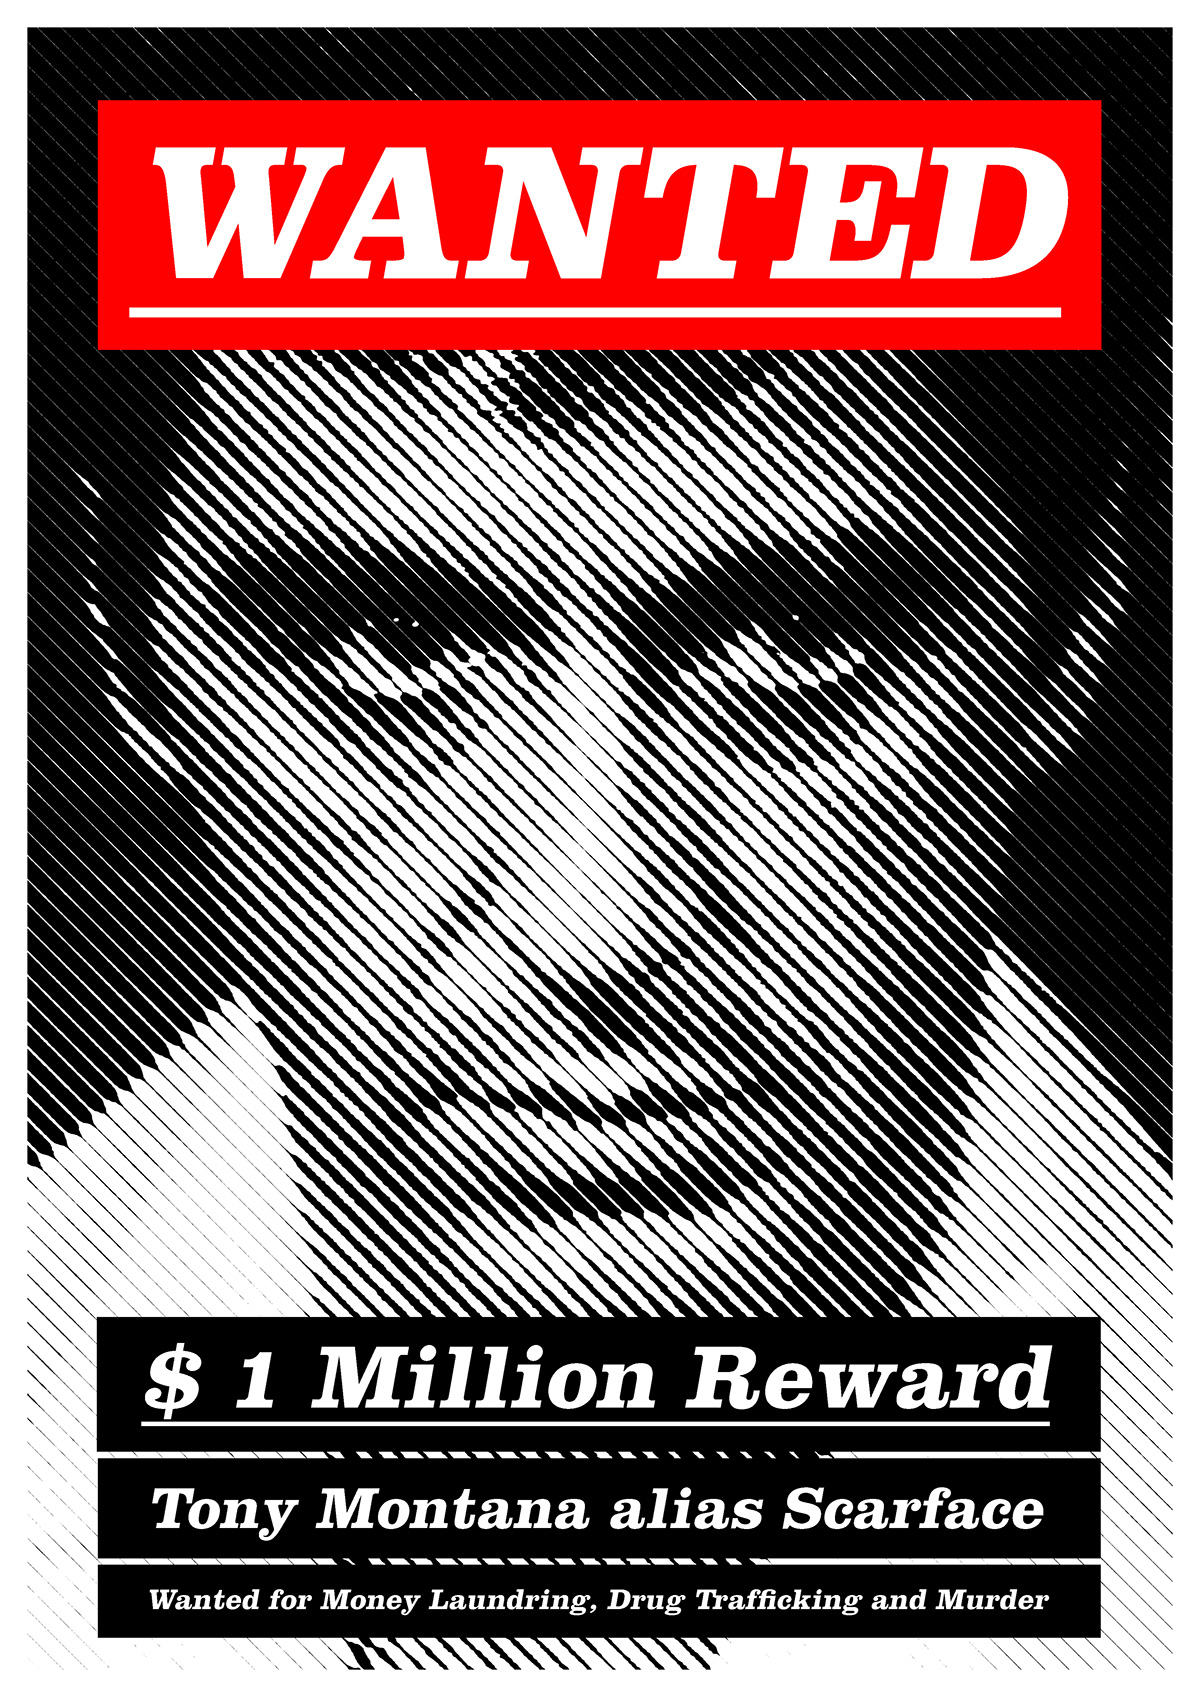 movie poster wanted most wanted wanted poster modern wanted poster criminal johnny depp DENZEL WASHINGTON scarface bonnie and clyde Clarendon